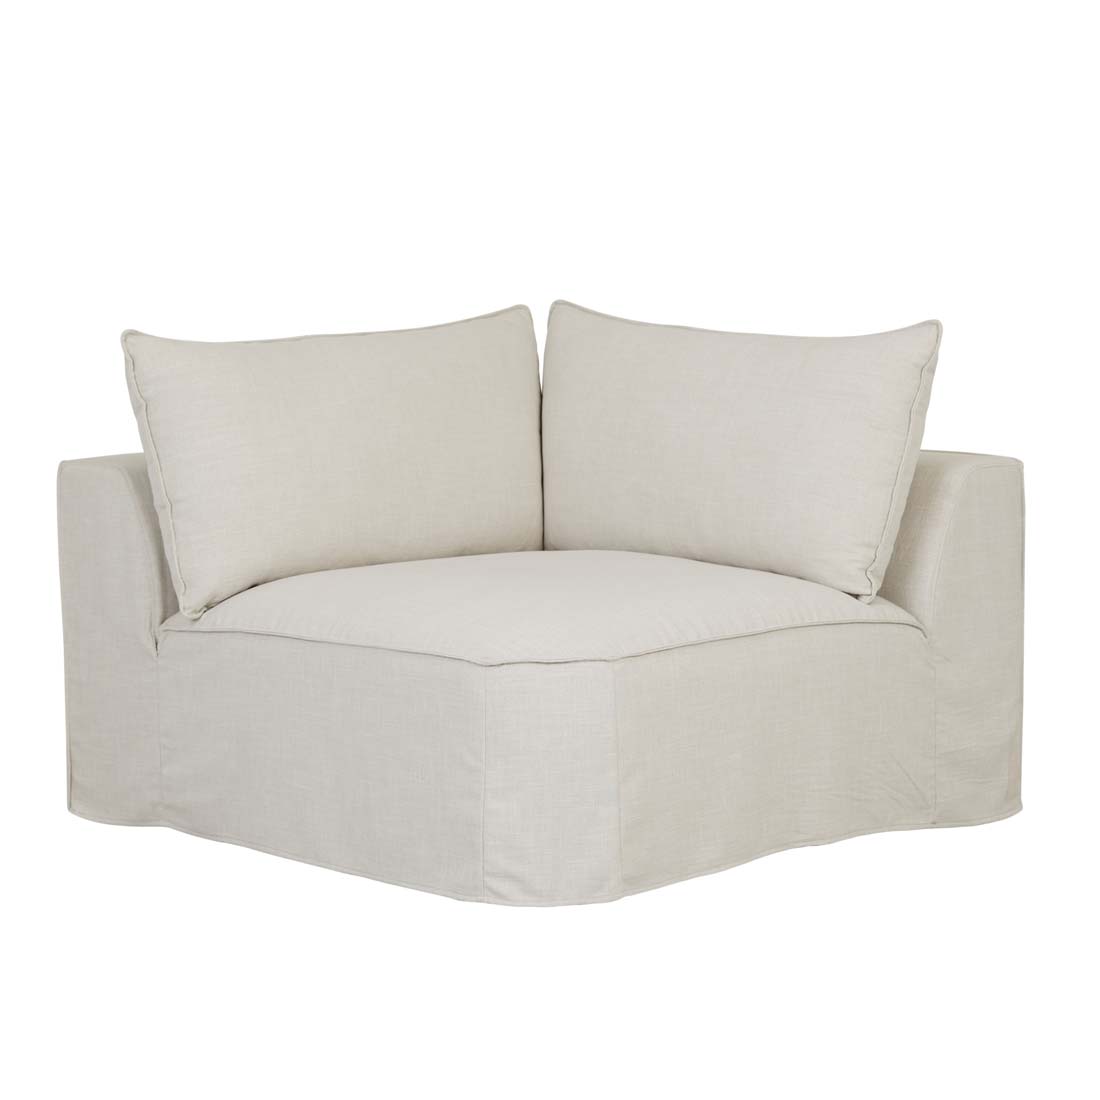 Airlie Slouch 1 Seater Corner Sofa